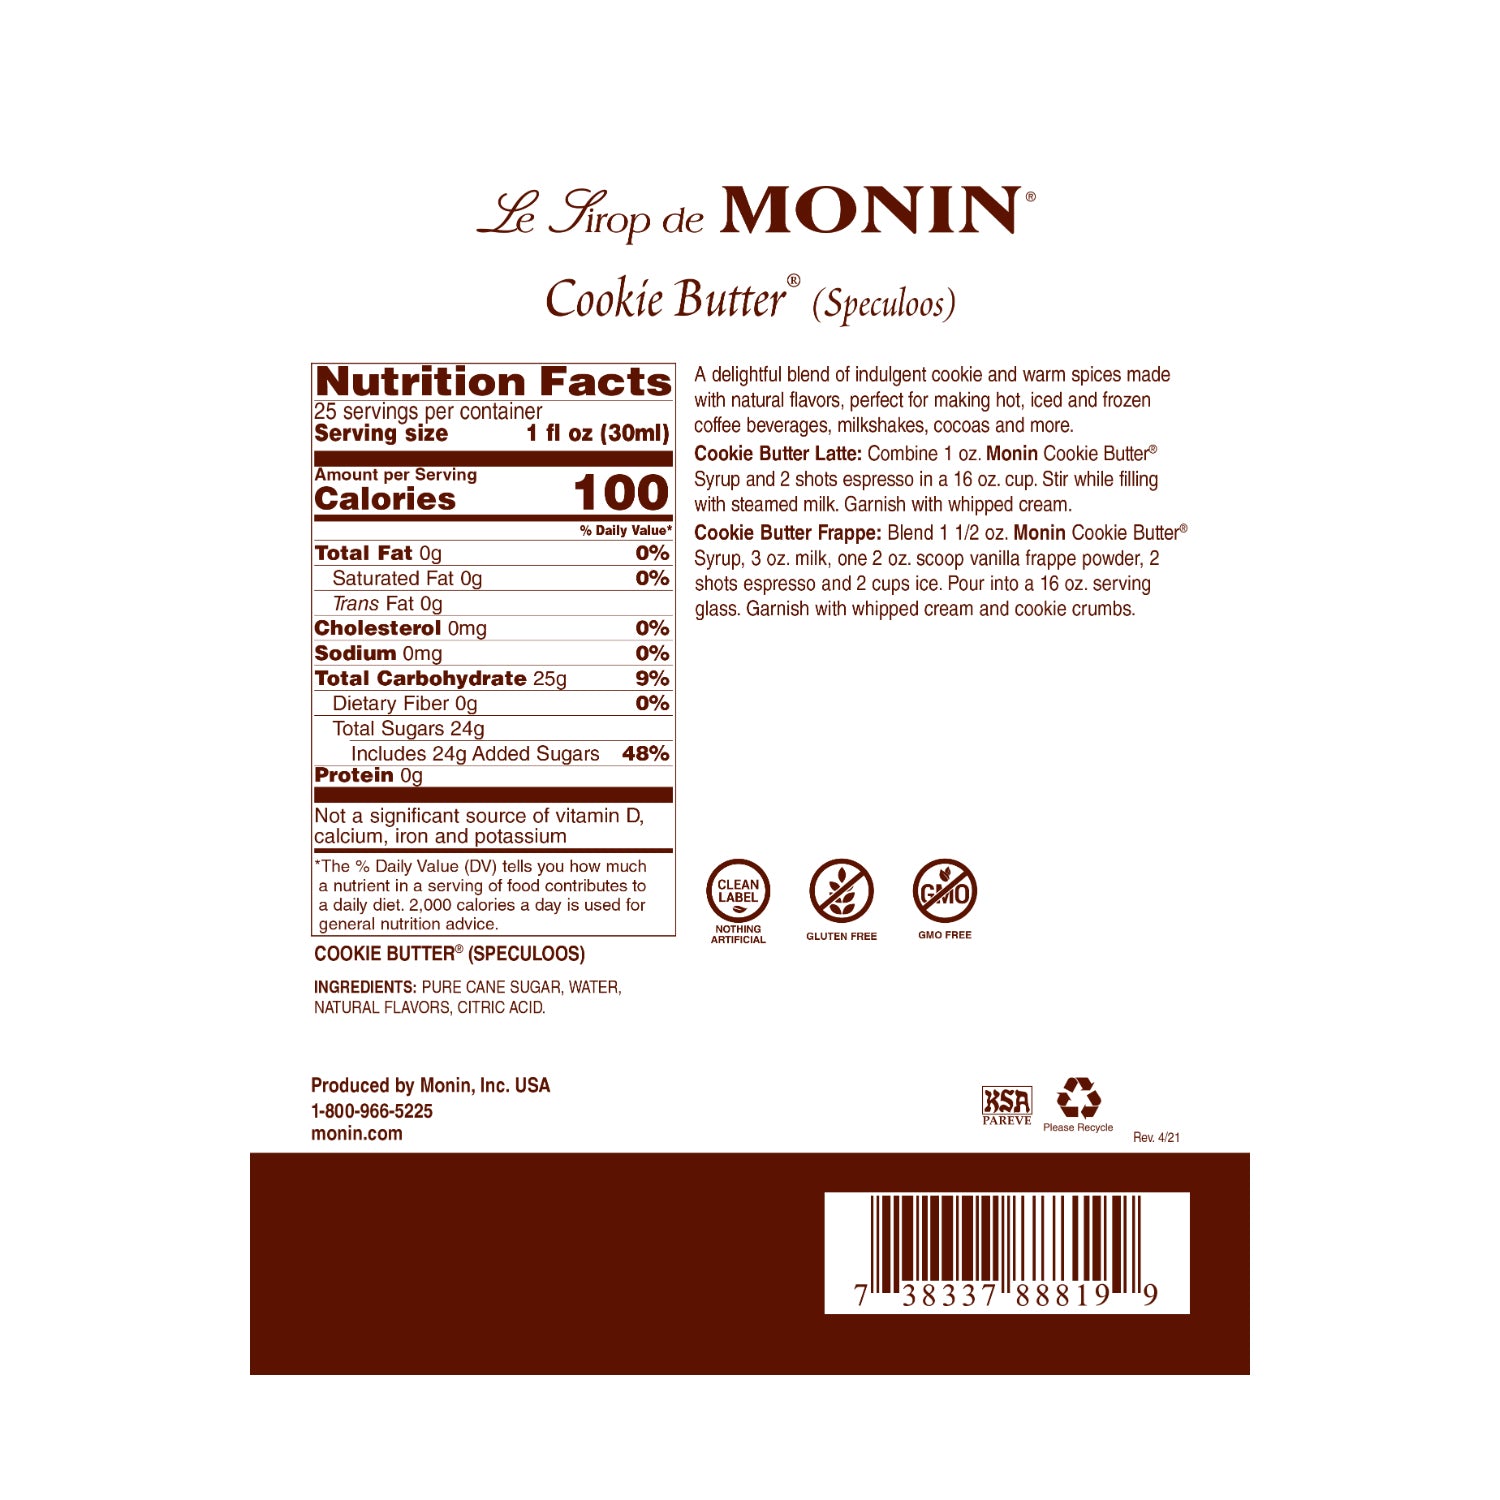 Monin Cookie Butter Syrup nutrition facts and recipe label